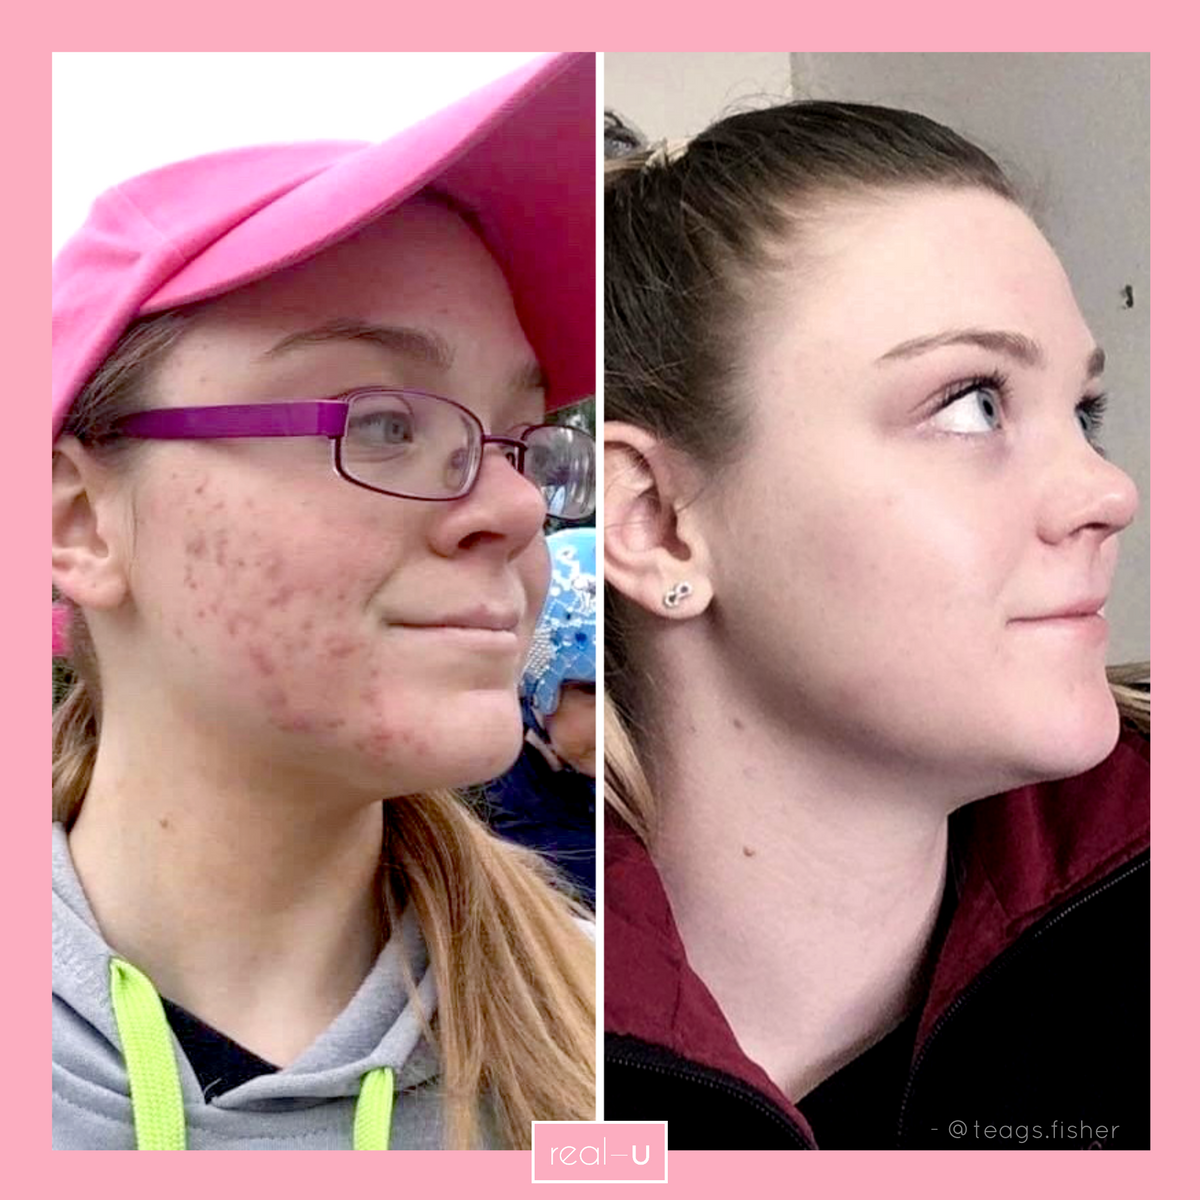 real-u before and after acne skincare pic